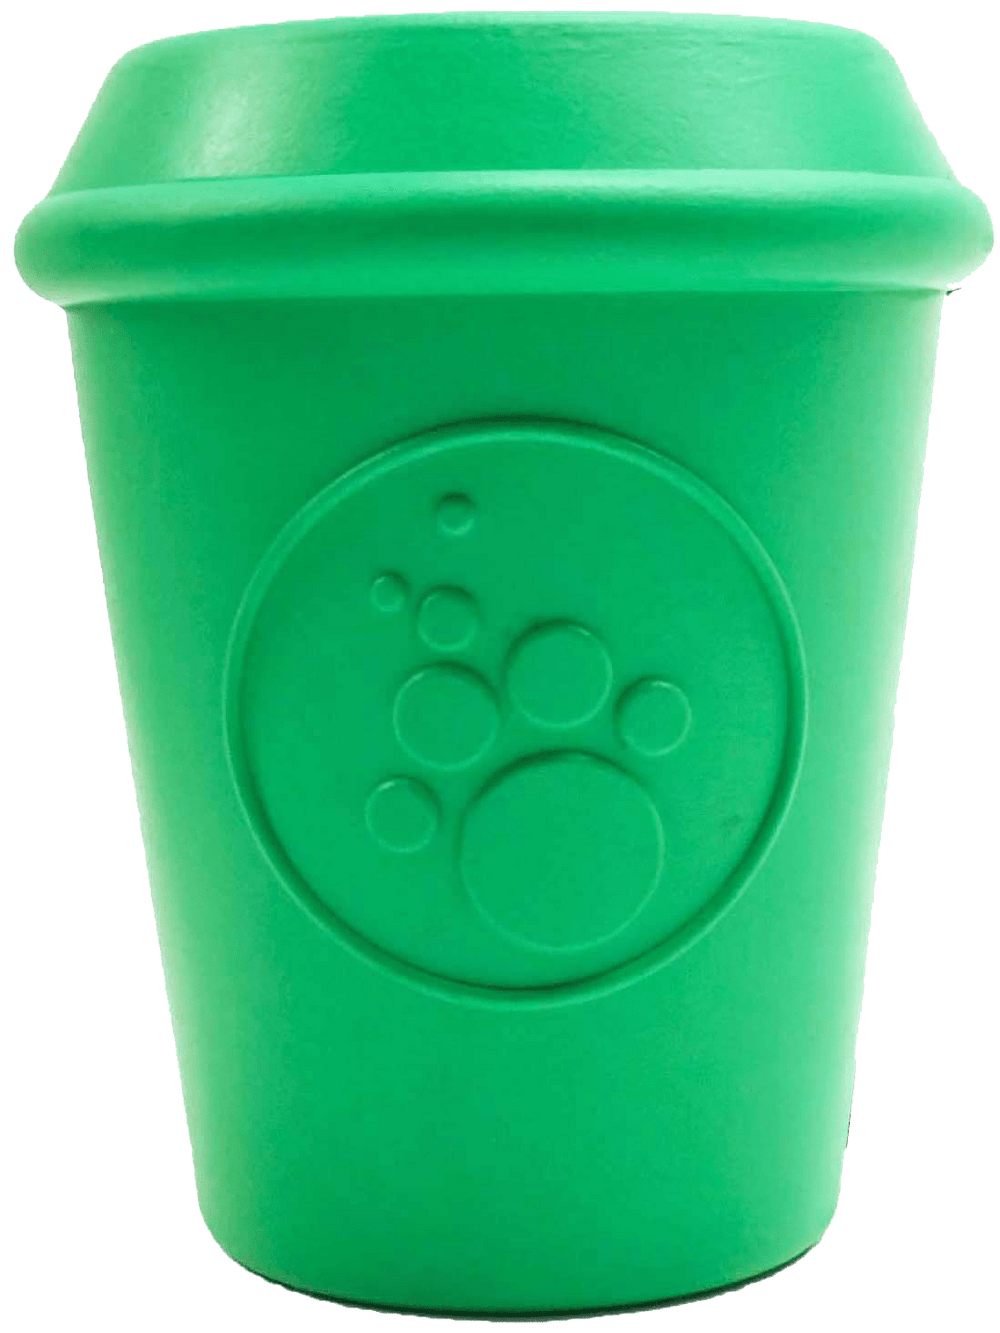 Coffee Cup Durable Rubber Chew Toy and Treat Dispenser